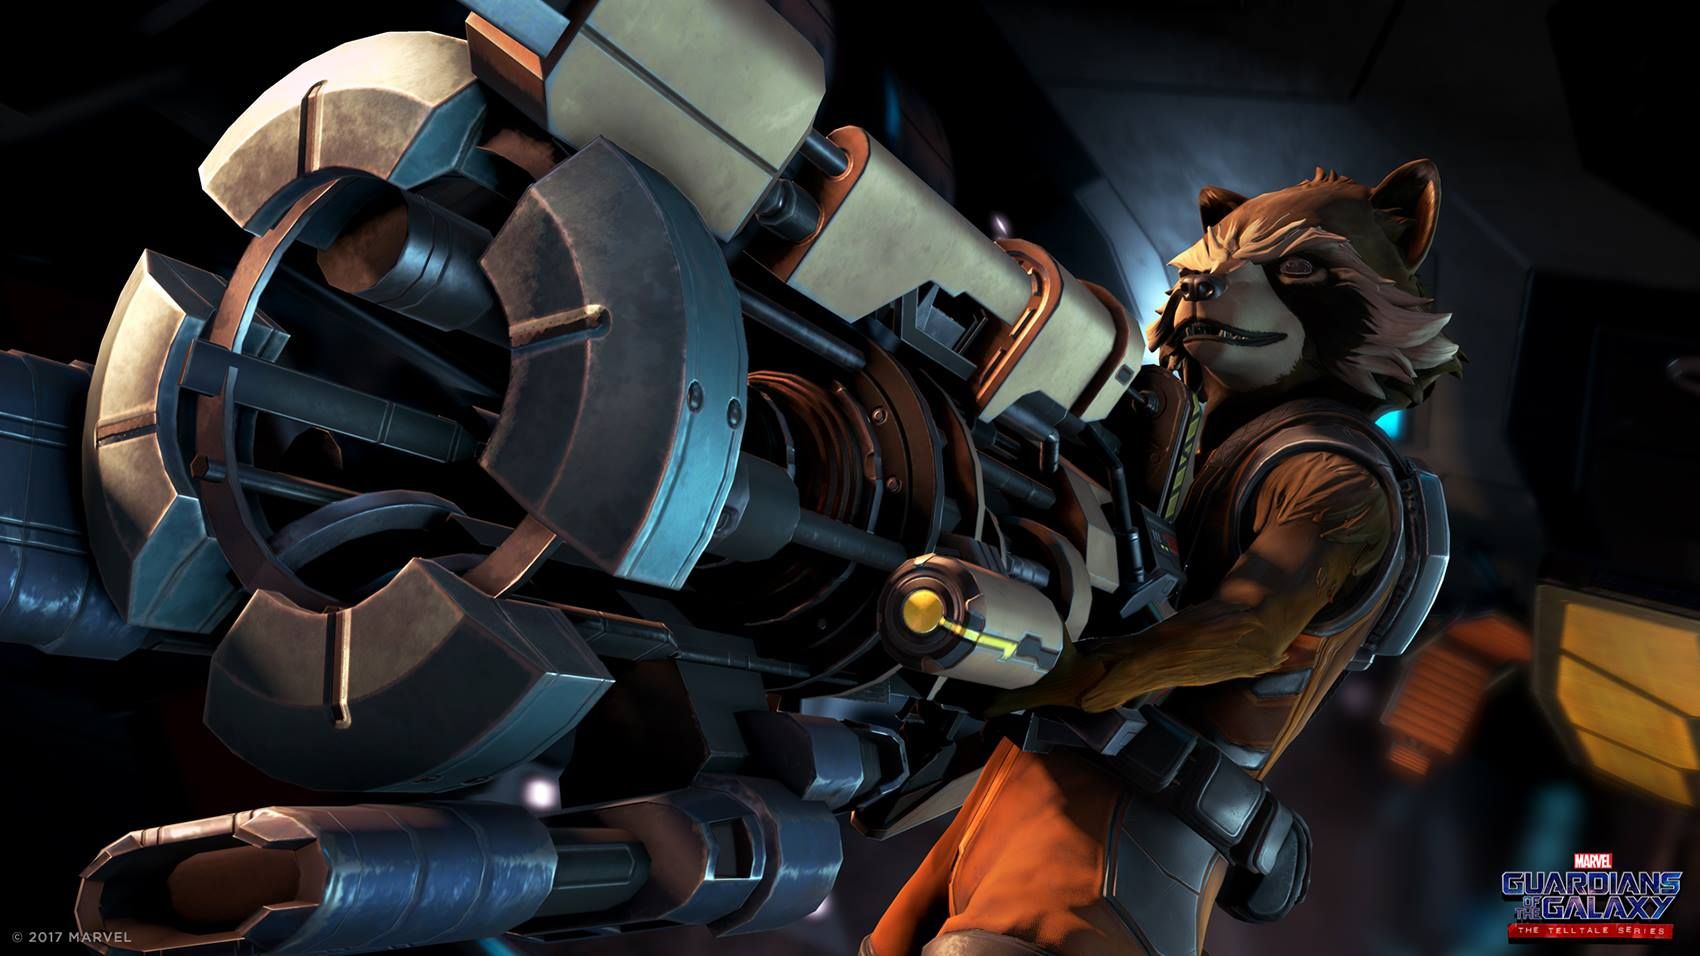 telltale-releases-trailer-for-tangled-up-in-blue-episode-1-of-guardians-of-the-galaxy-game